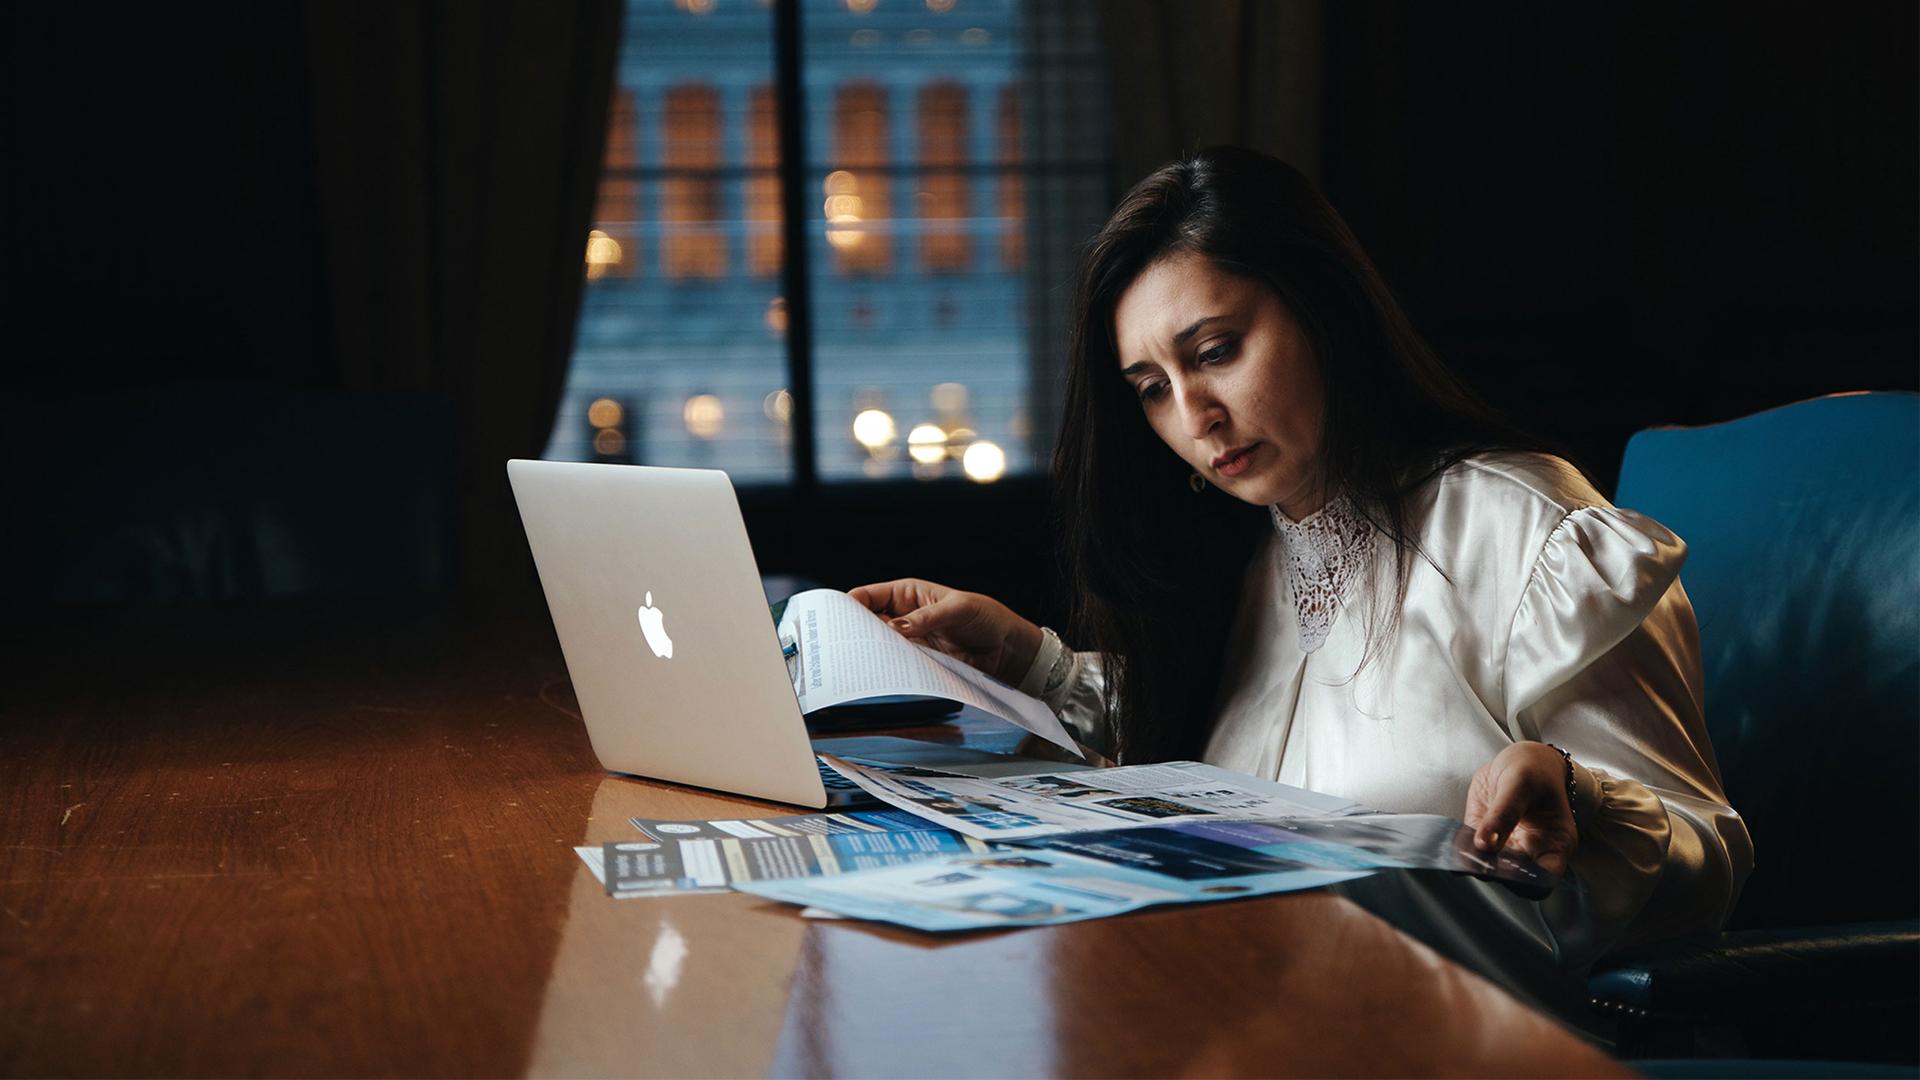 Woman in a white blouse working at a desk on her laptop